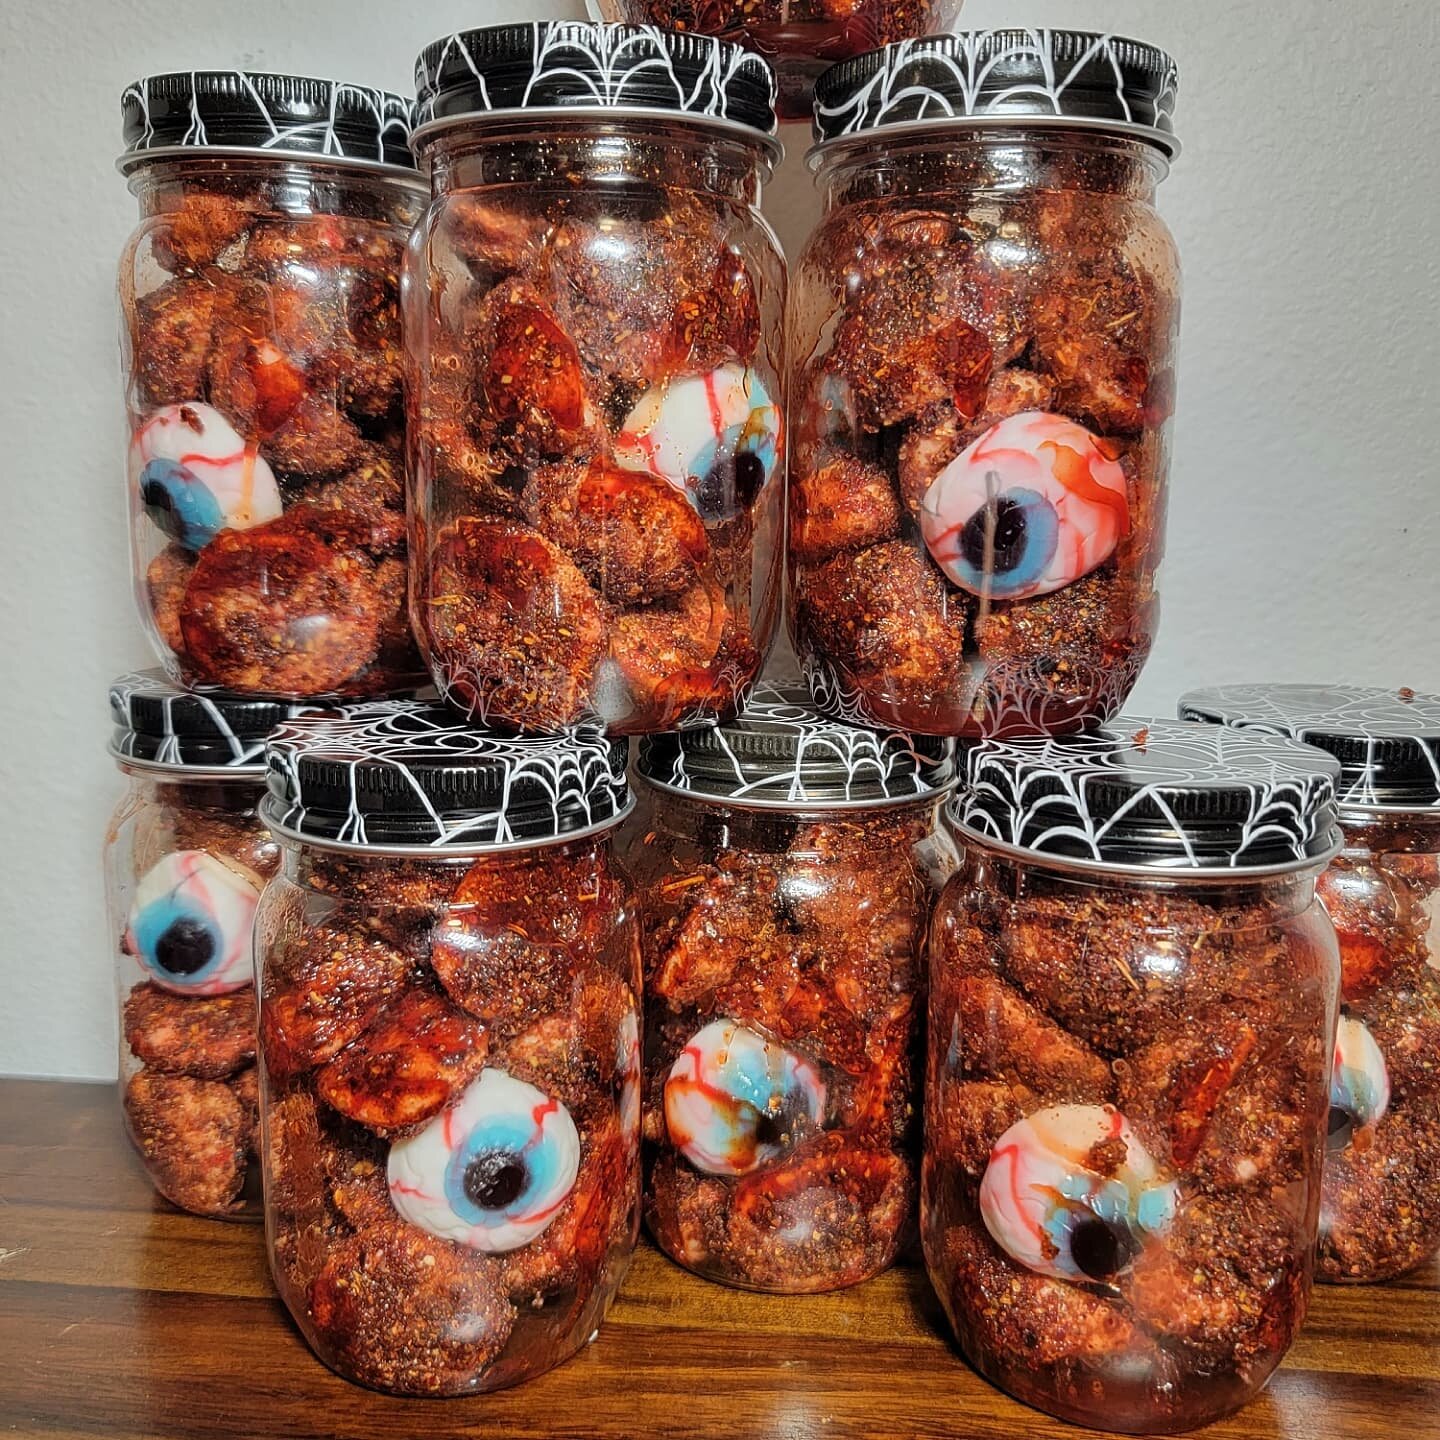 Jars full of gummy eyes will be sold this weekend at our pop up events!